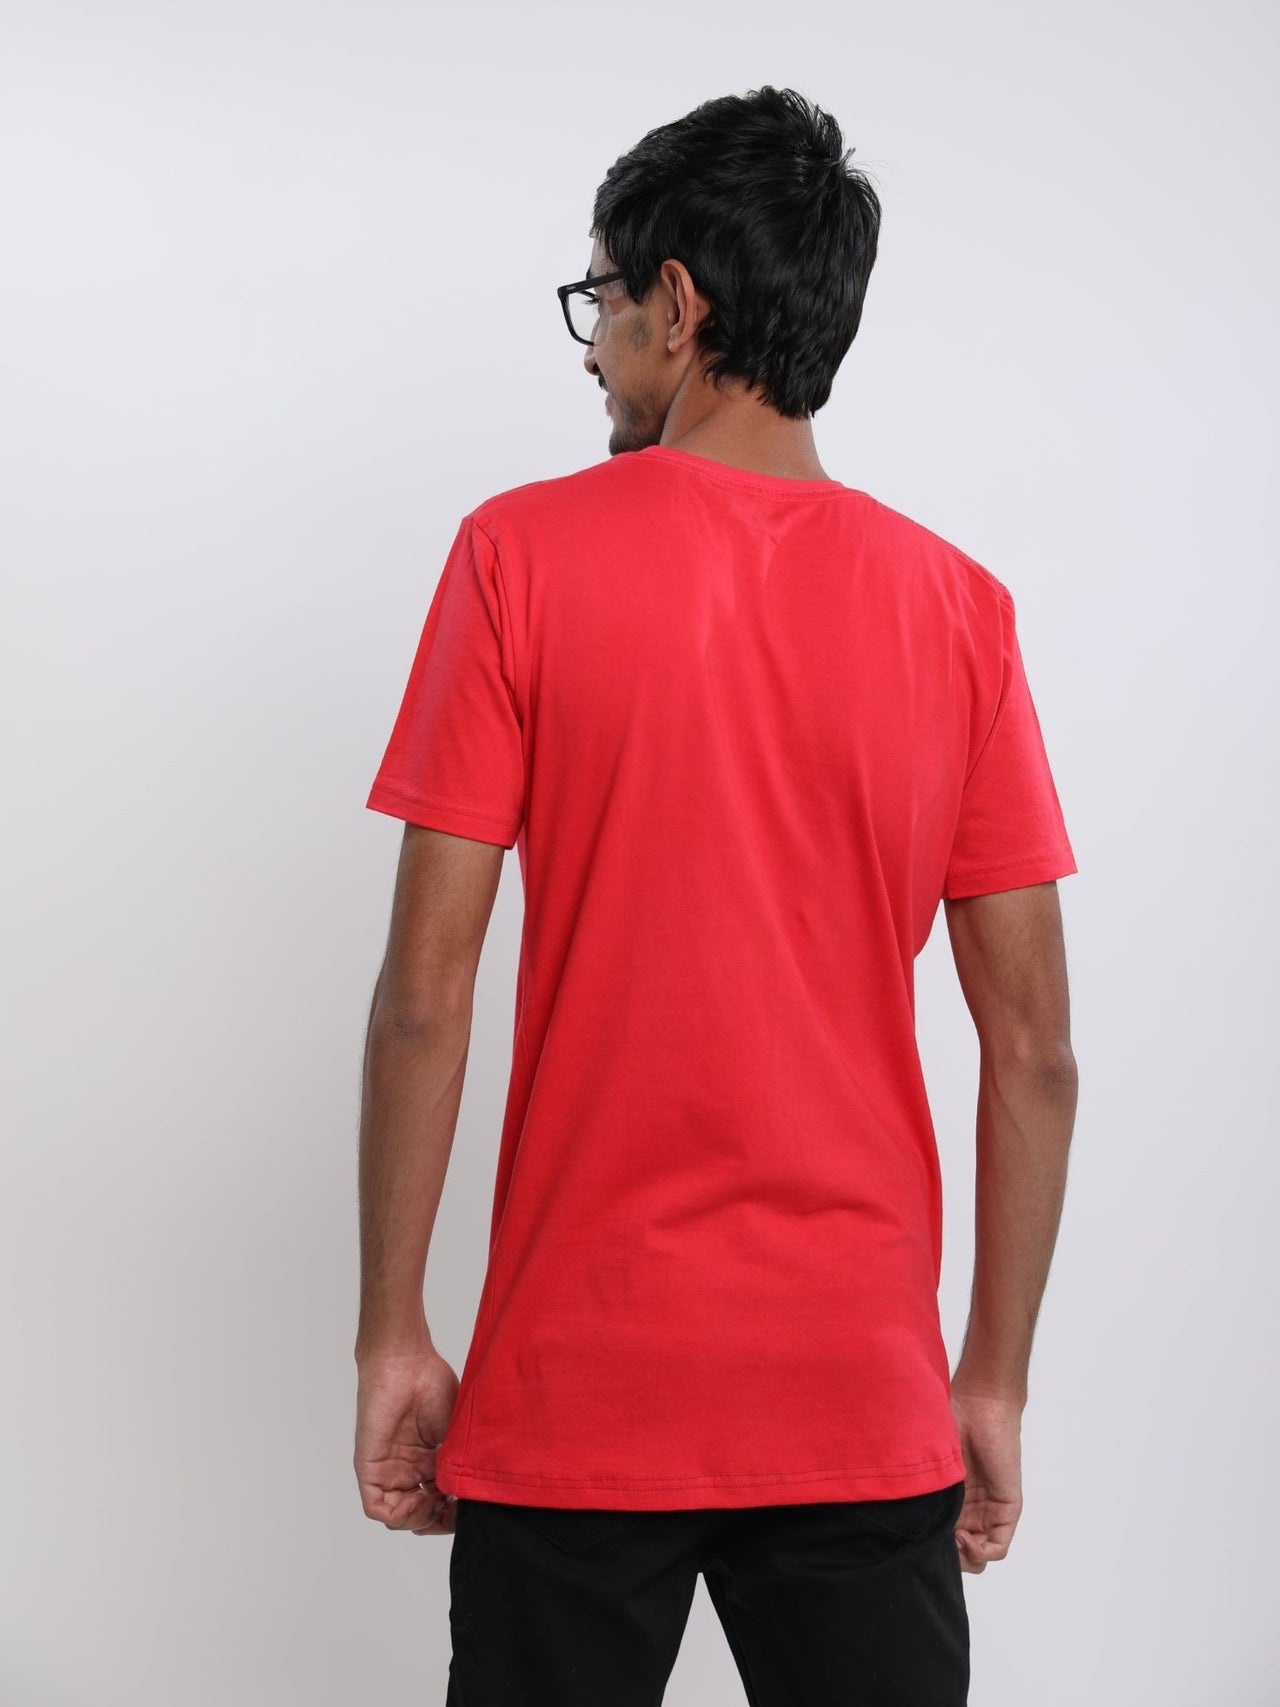 A shot from behind of a tall skinny guy in the studio wearing a red small tall slim t-shirt.